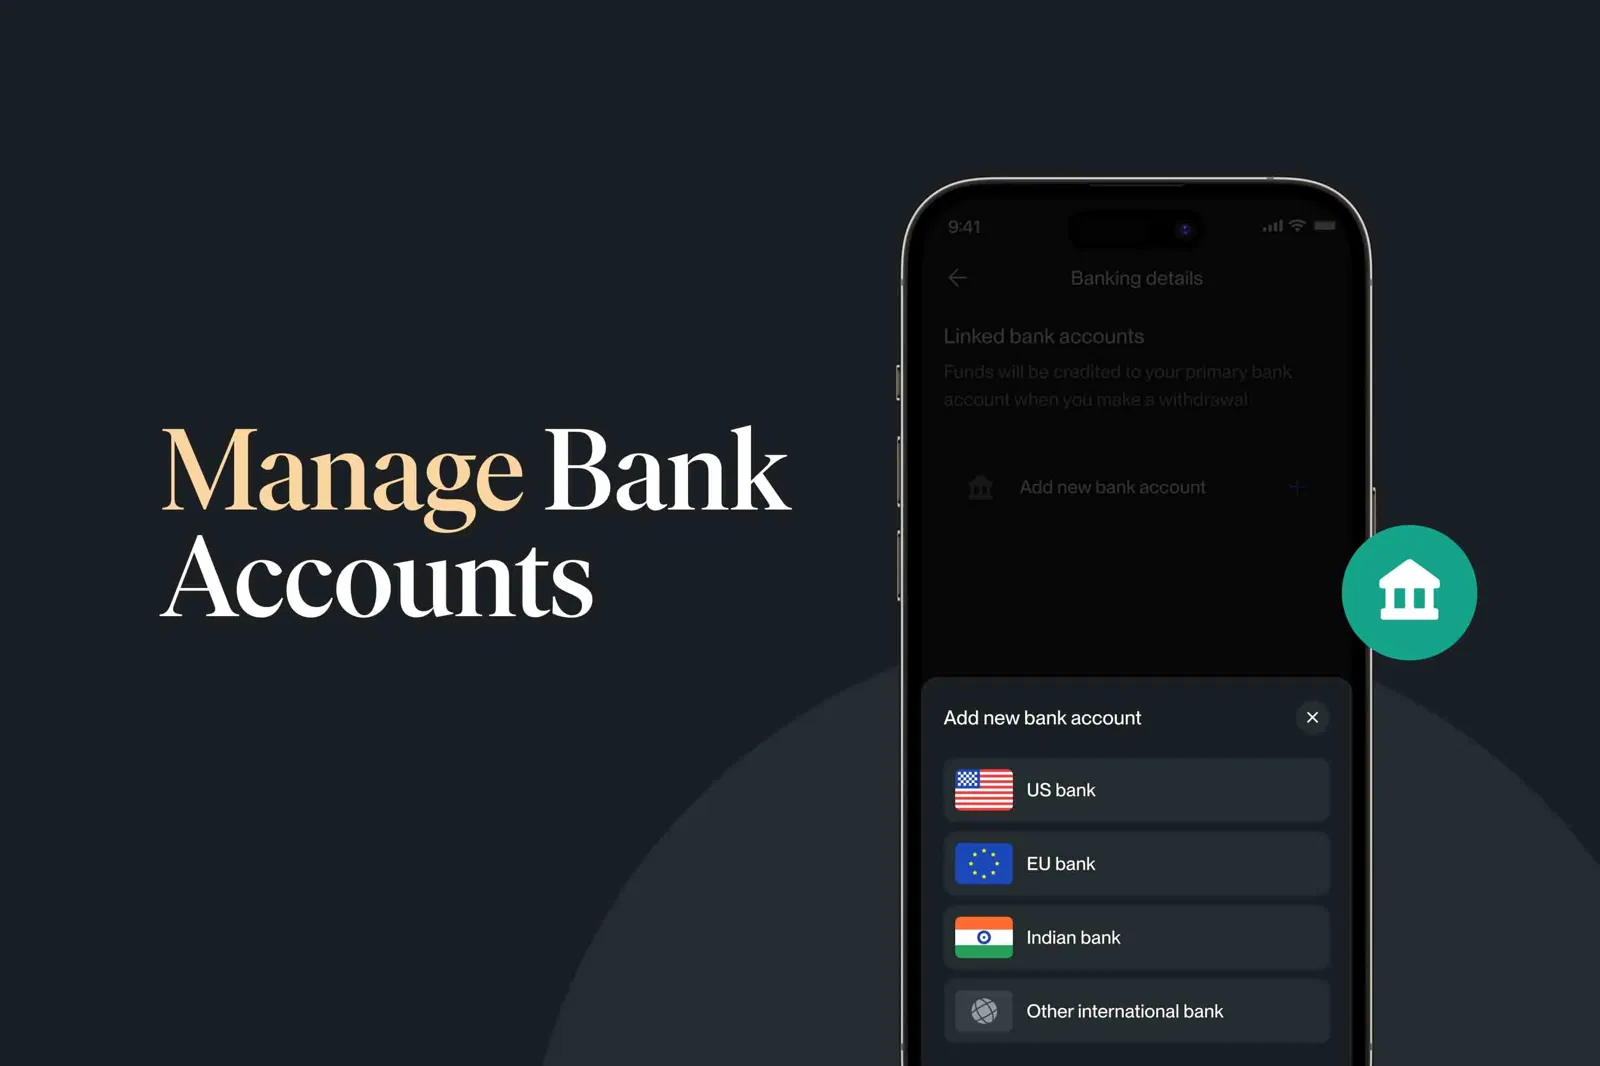 How to add or remove a bank account?